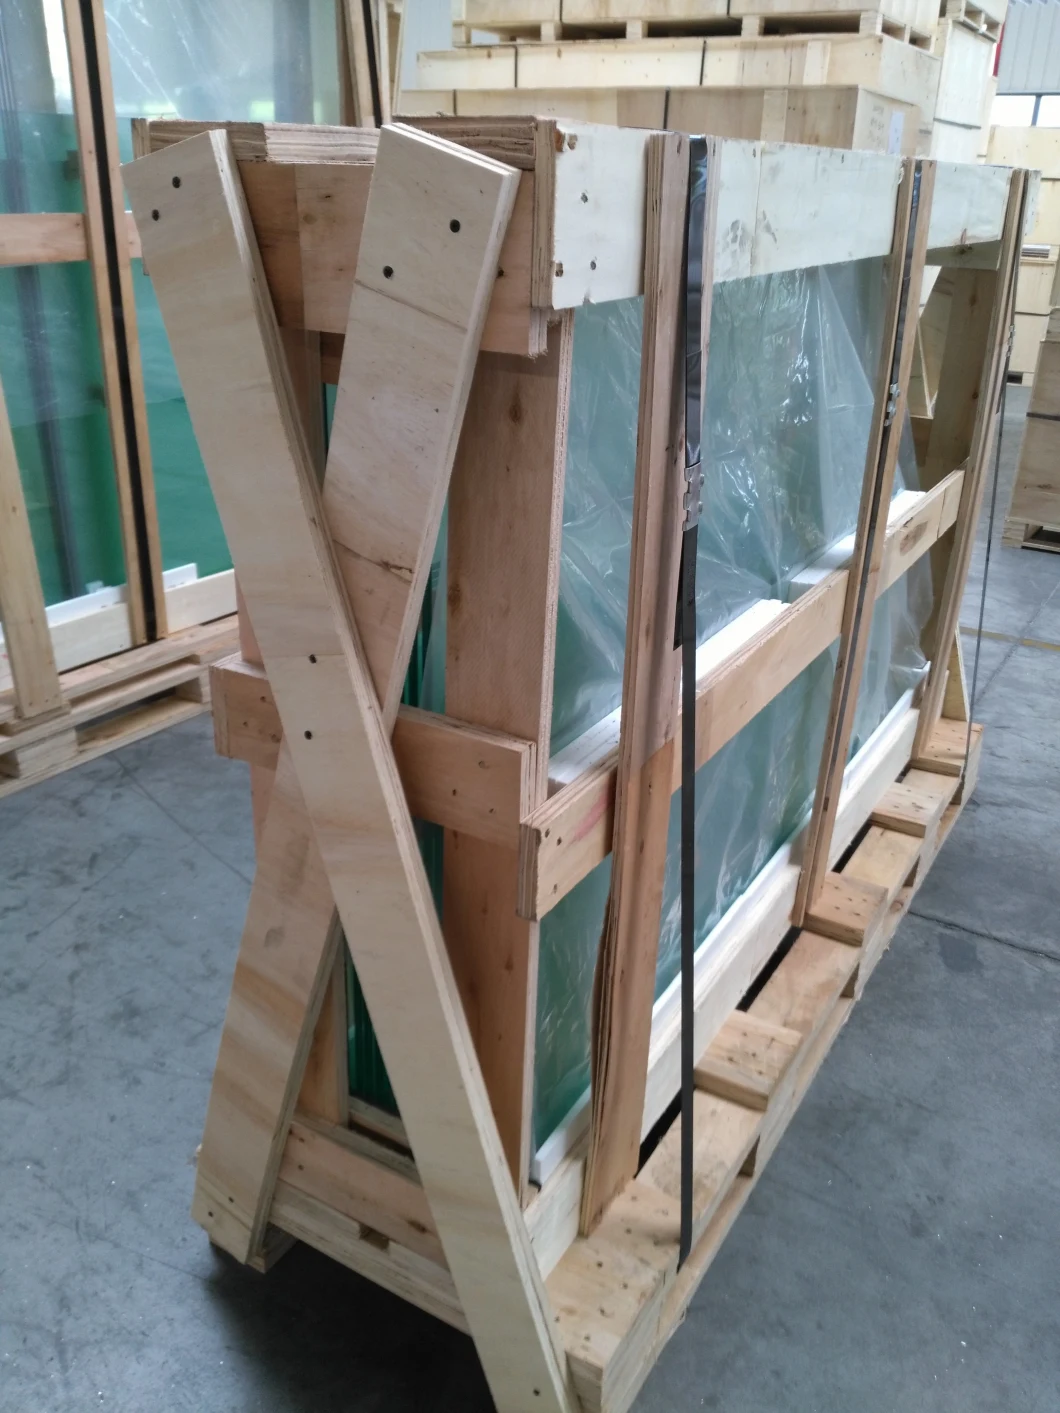 Frosted Laminated Glass for Hotel Bathroom Glass Door in USA Hotel Chain Project